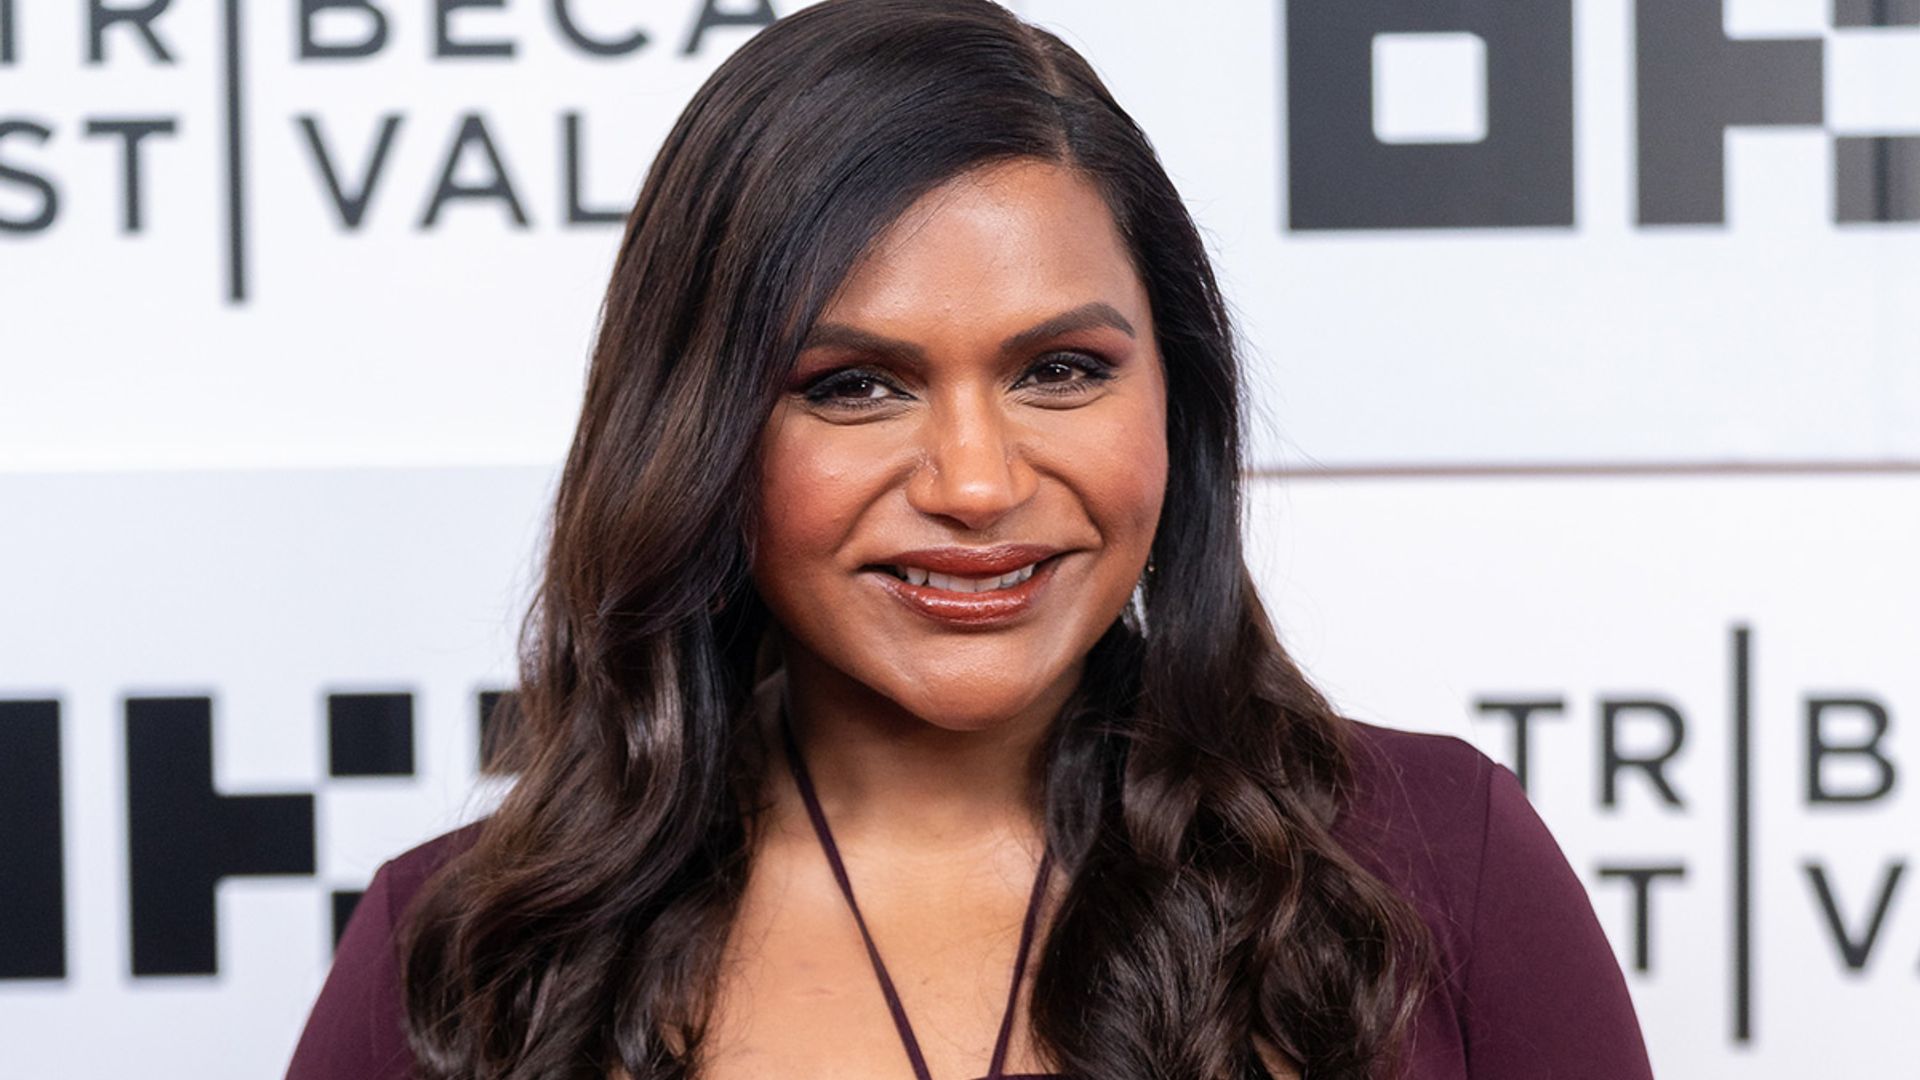 mindy-kaling-sends-temperatures-soaring-in-daring-outfit-with-thigh